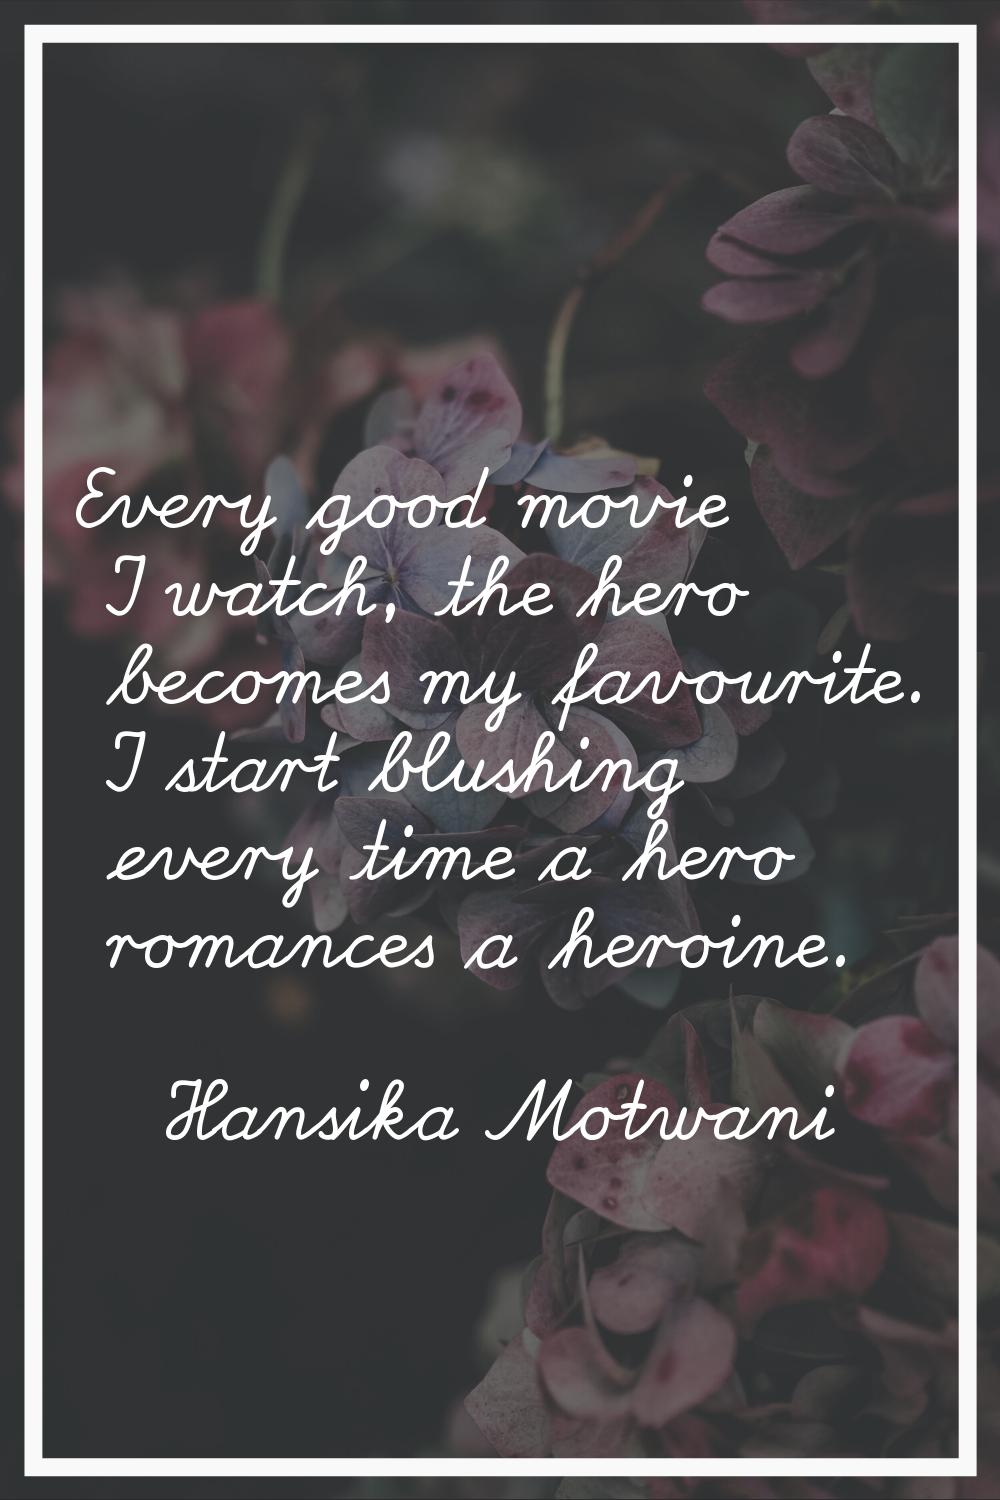 Every good movie I watch, the hero becomes my favourite. I start blushing every time a hero romance